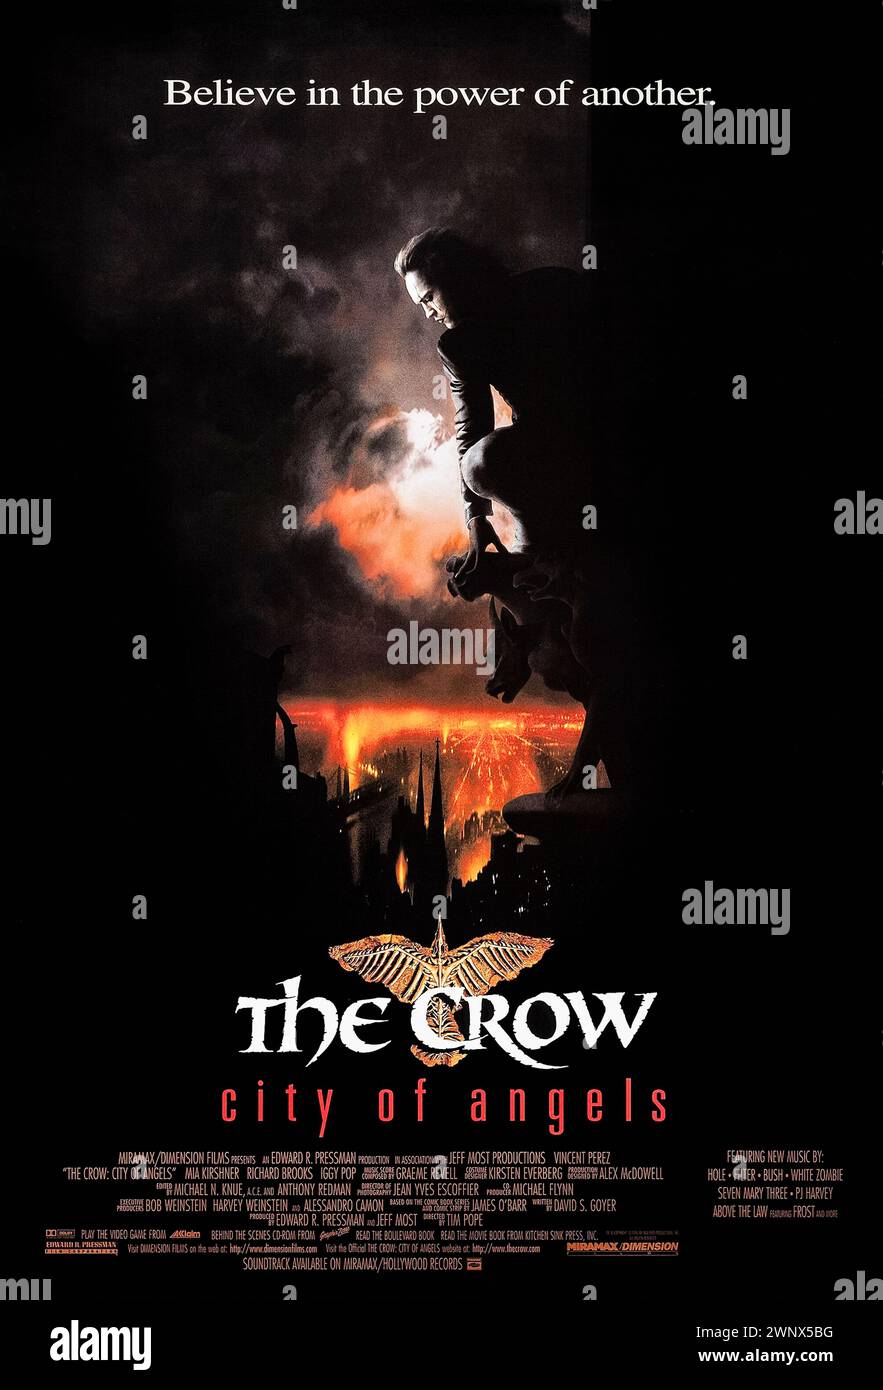 The Crow: City of Angels (1996) directed by Tim Pope and starring Vincent Perez, Mia Kirshner and Richard Brooks. The spirit of the Crow resurrects another man seeking revenge for the murder of his son. Photograph of an original 1996 US one sheet poster. ***EDITORIAL USE ONLY*** Credit: BFA / Miramax Films Stock Photo